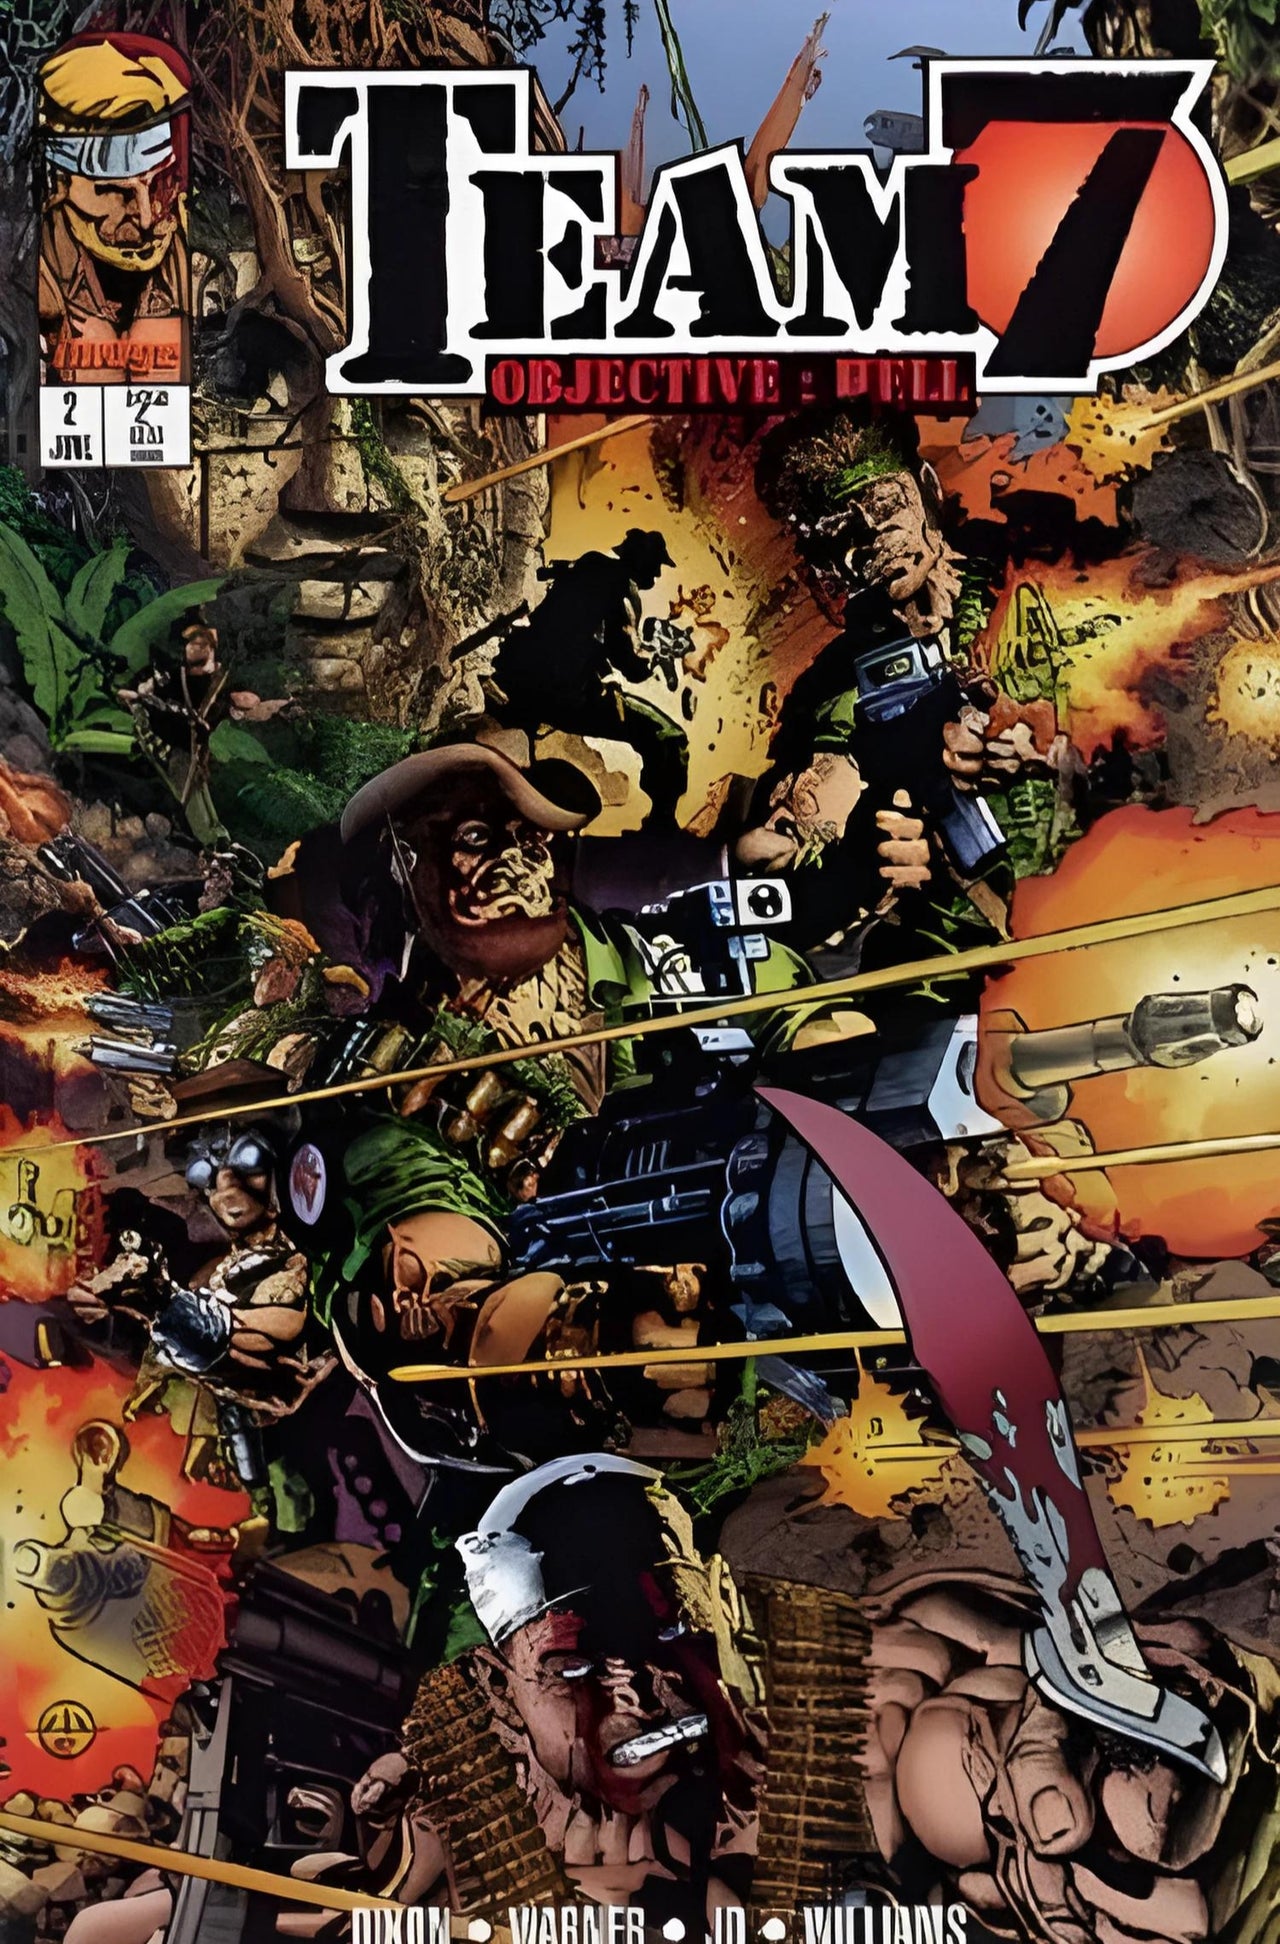 Team 7 - Objective: Hell (1995) #2